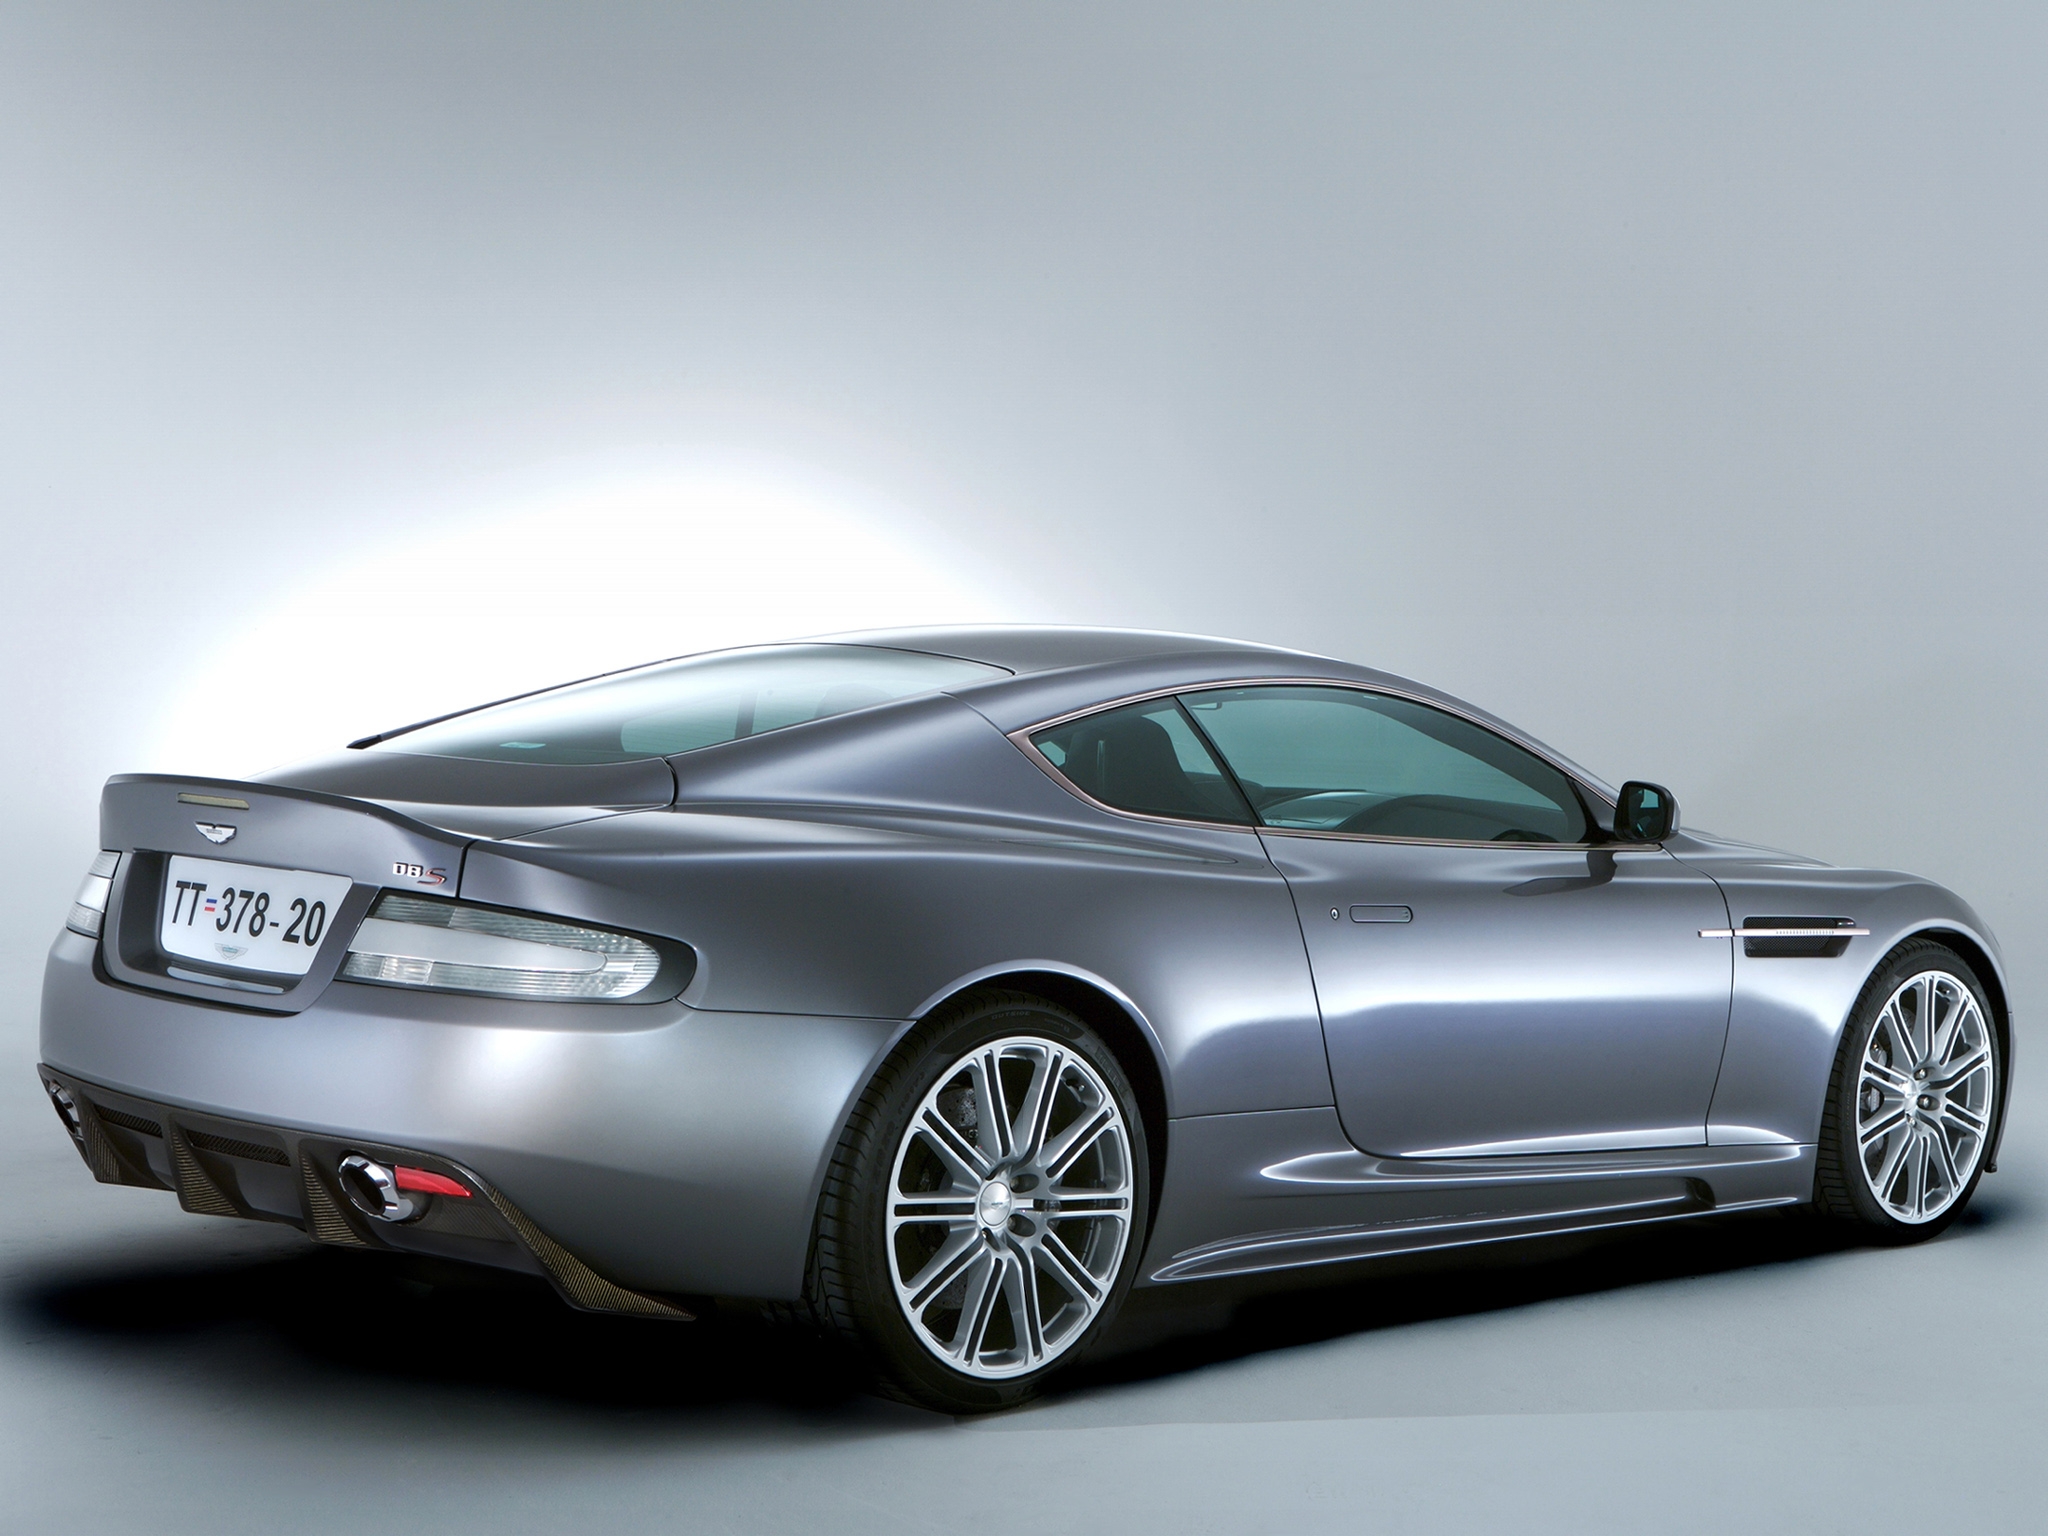 dbs, cars, side view, aston martin collection of HD images